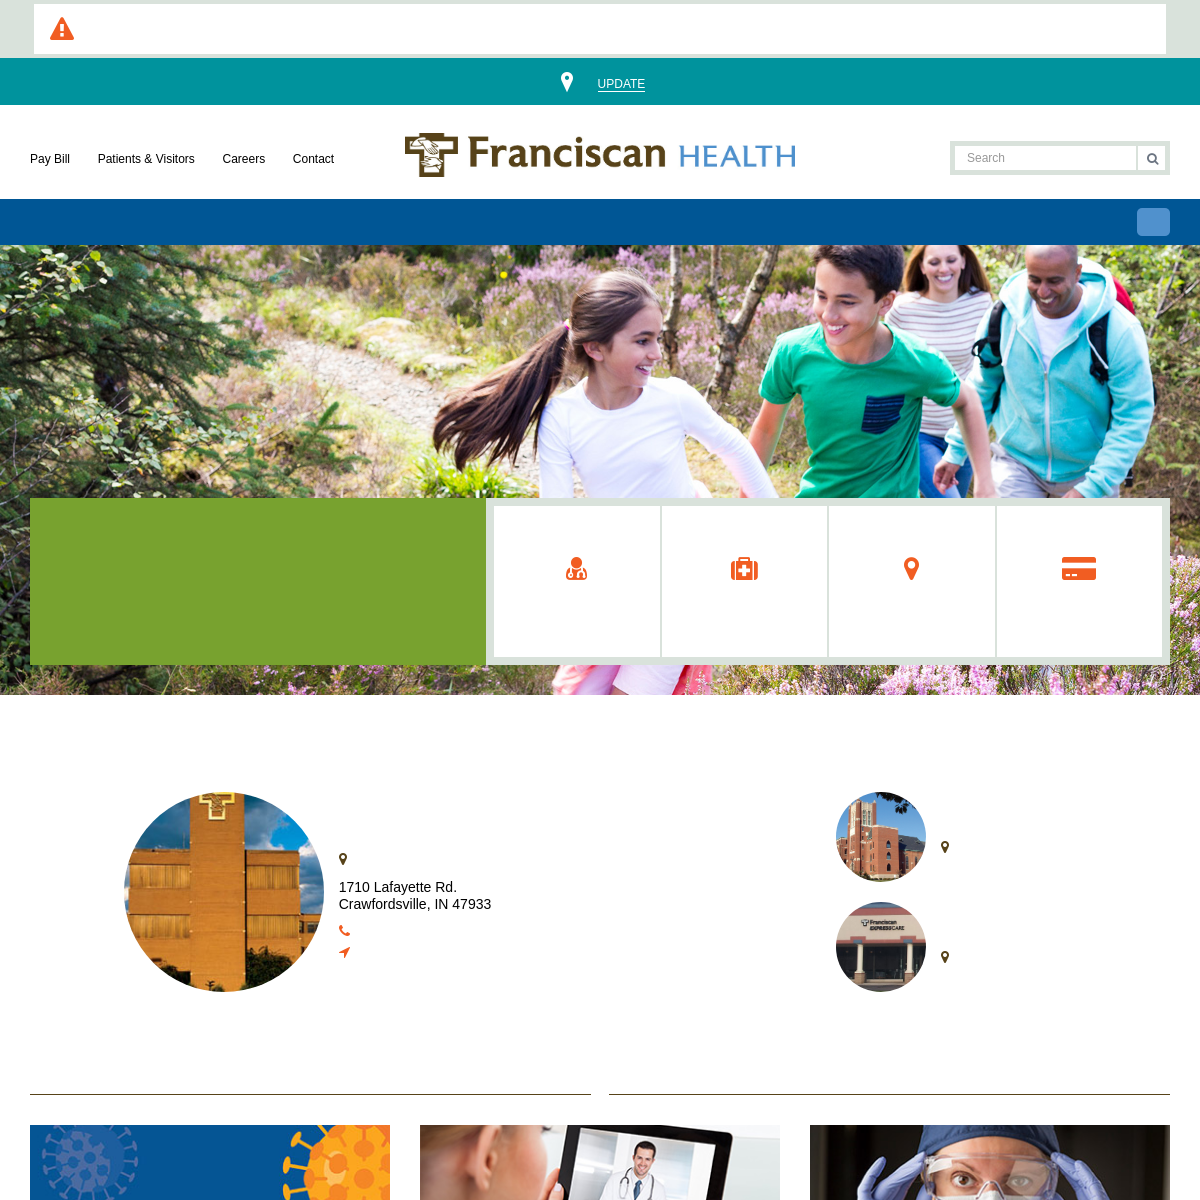 A complete backup of franciscanhealth.org